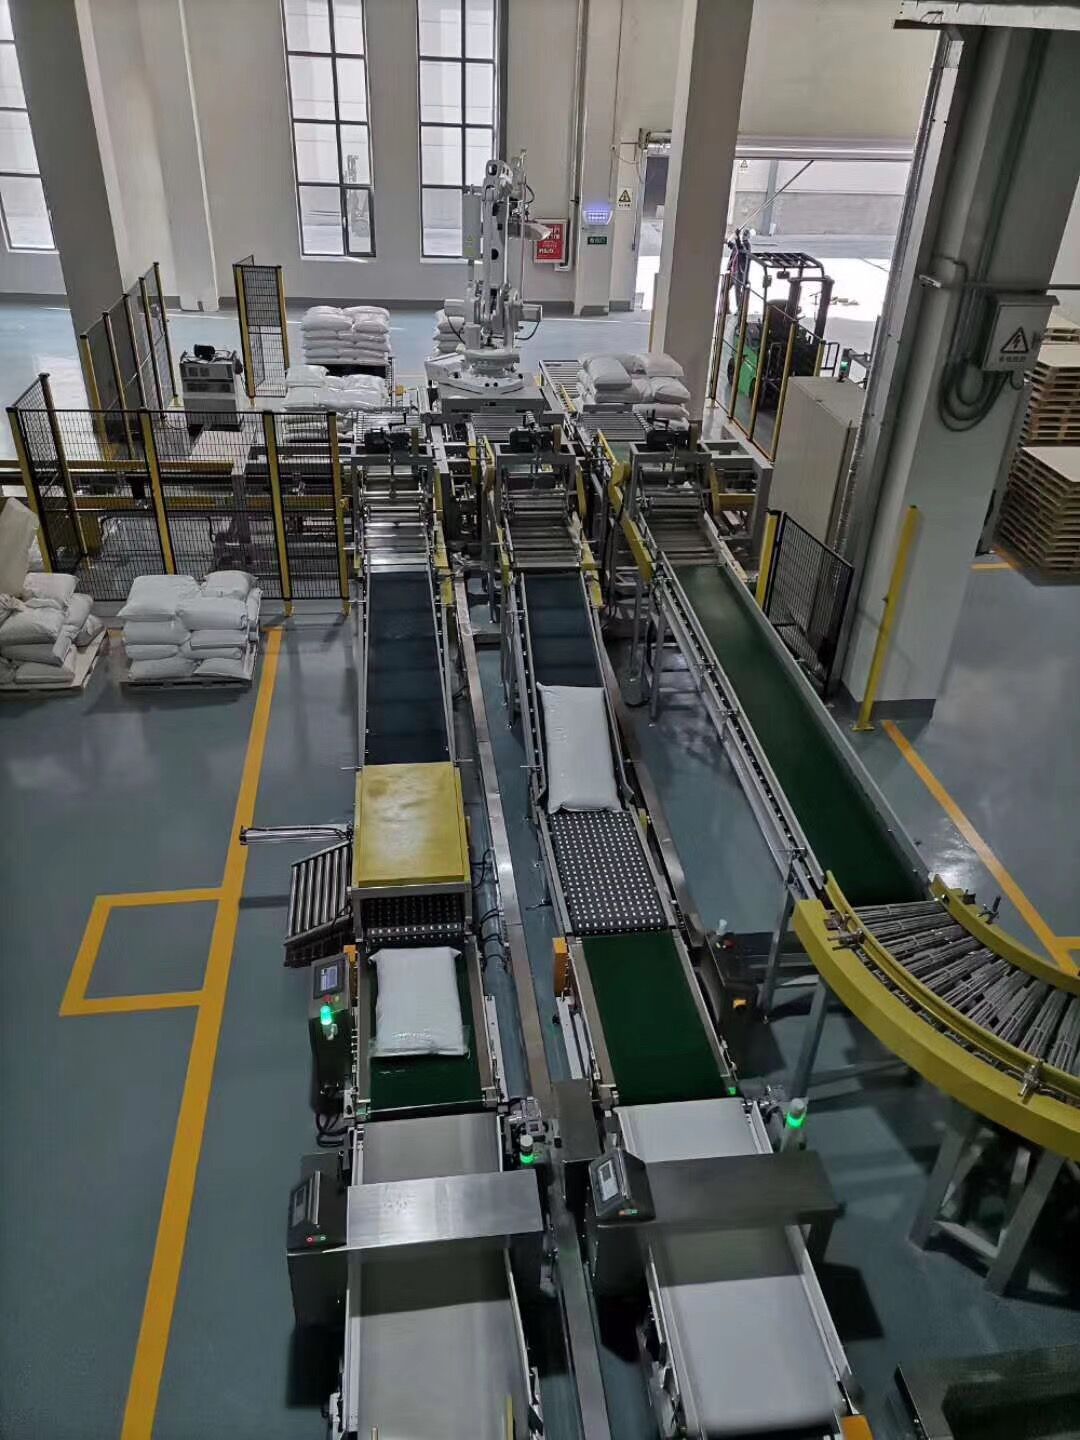 automatic packing machine Zircon Sand bagging machine fully Automatic Packing Palletizing Line, Fully Automatic Packing Line, Fully Automatic Bagging Line, Fully Automatic filling and packaging line, 